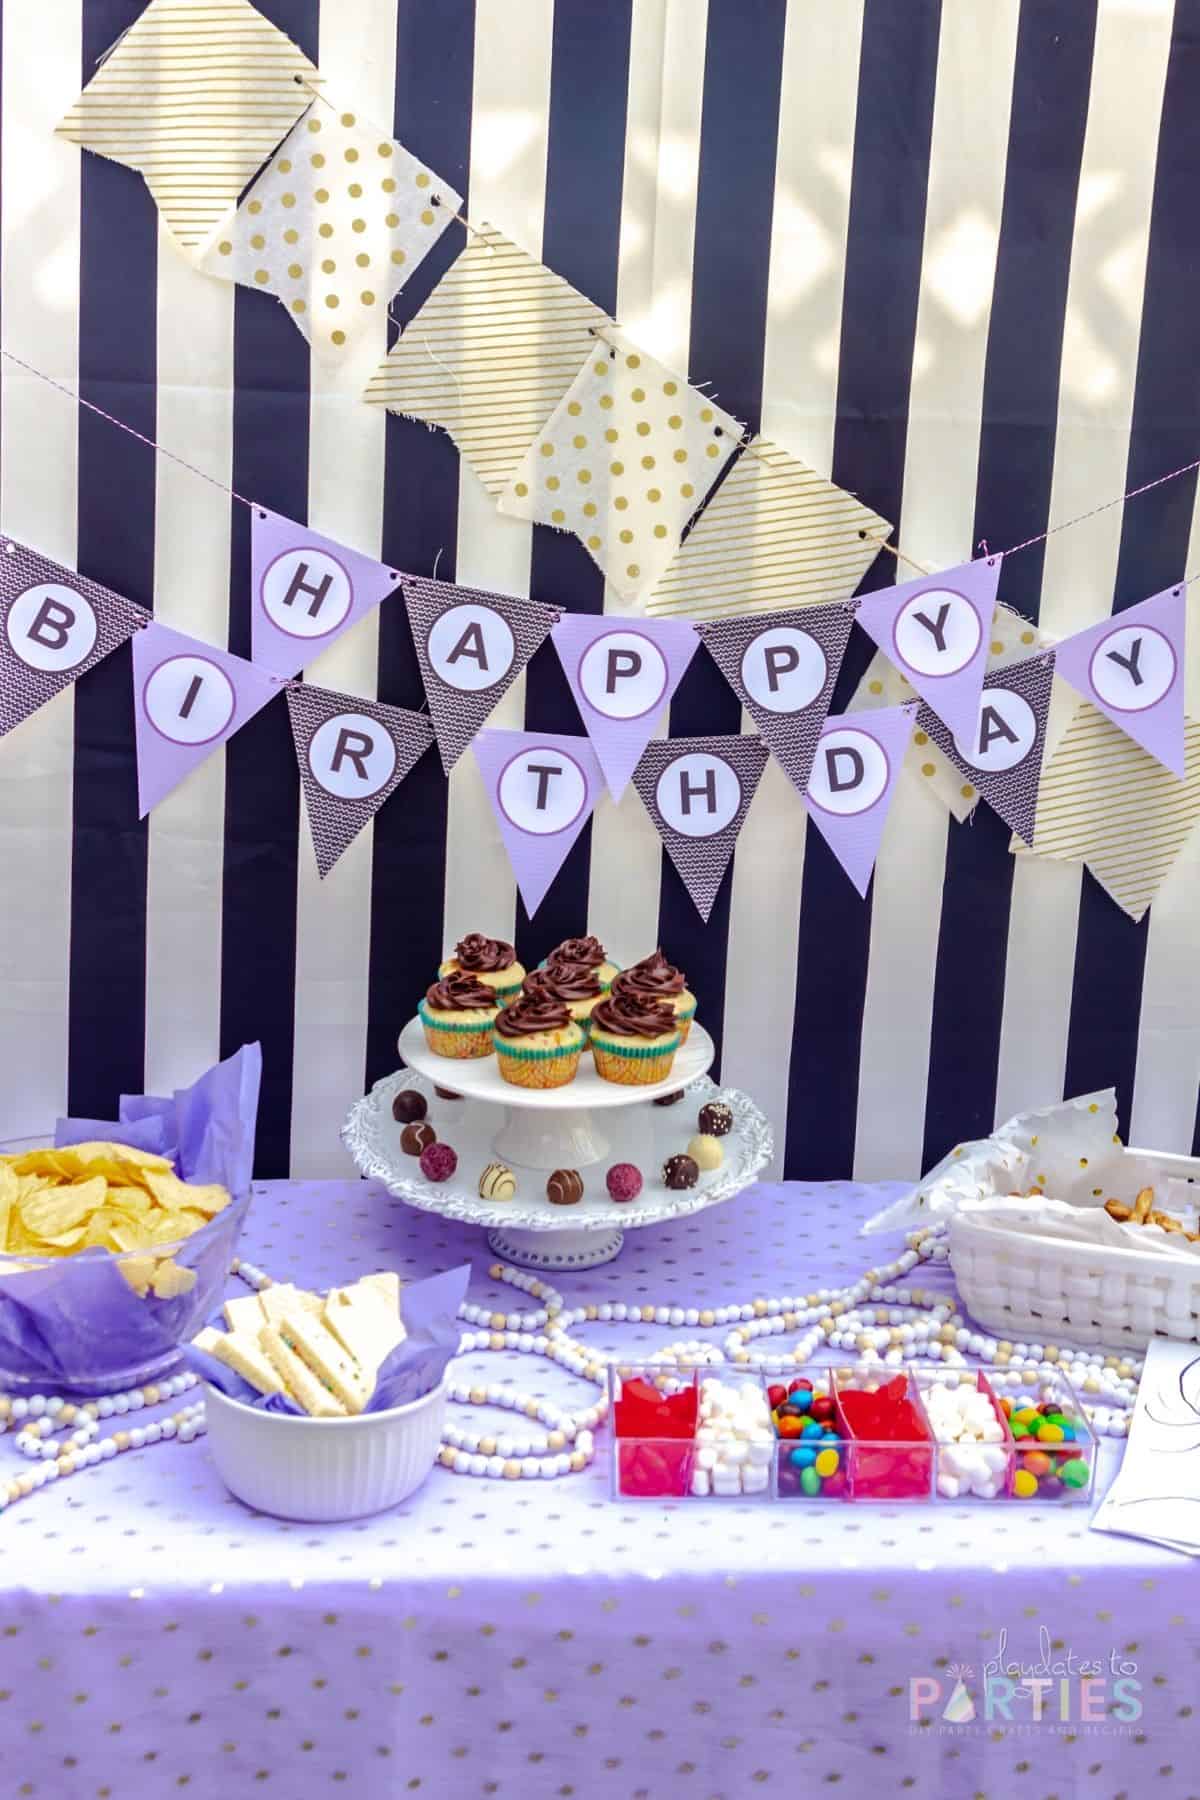 simple dessert table setup with easy store-bought movie snacks for treats on a purple and black themed color scheme, with gold accents